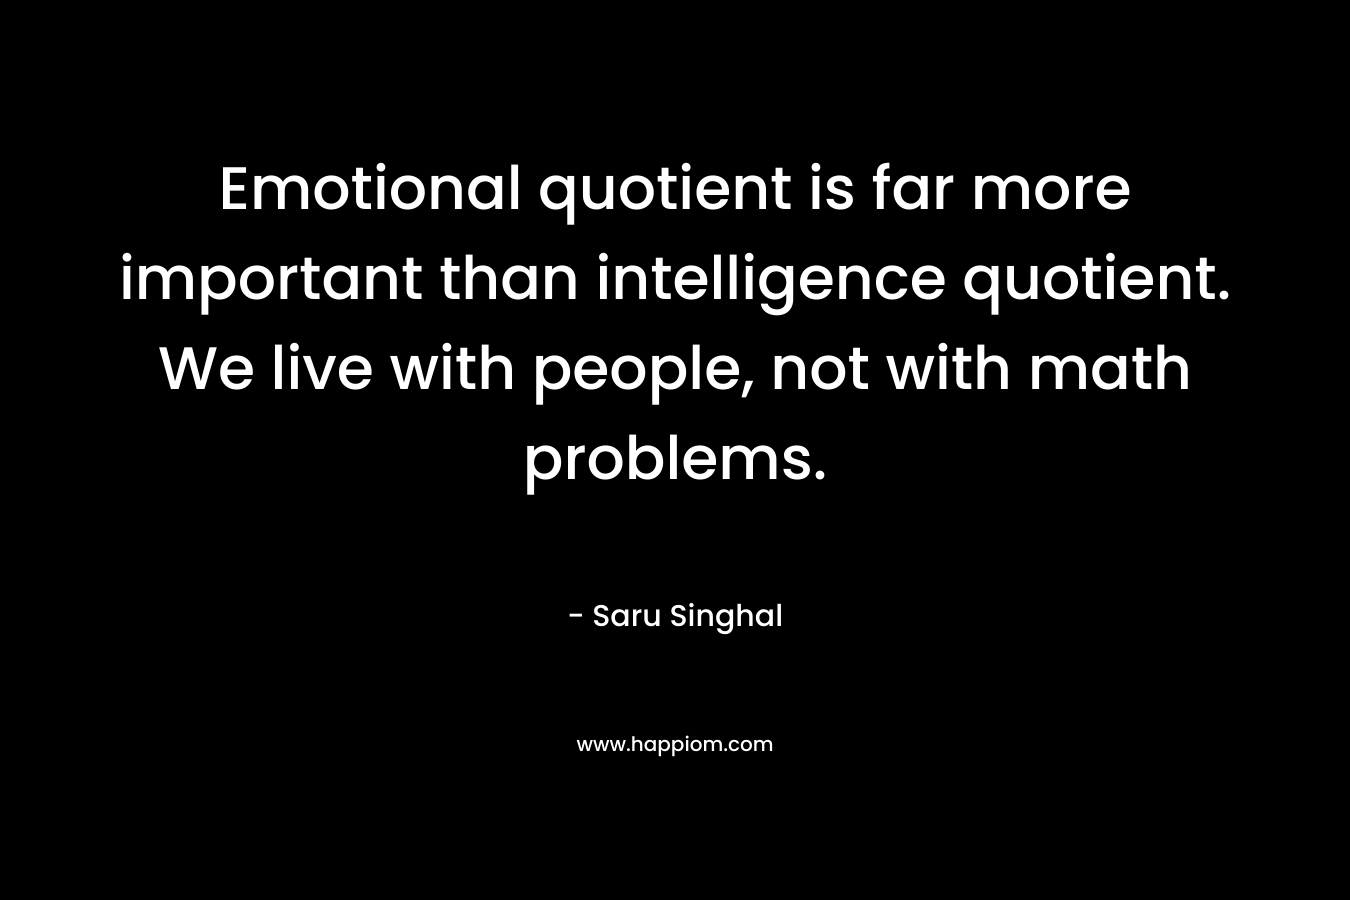 Emotional quotient is far more important than intelligence quotient. We live with people, not with math problems. – Saru Singhal